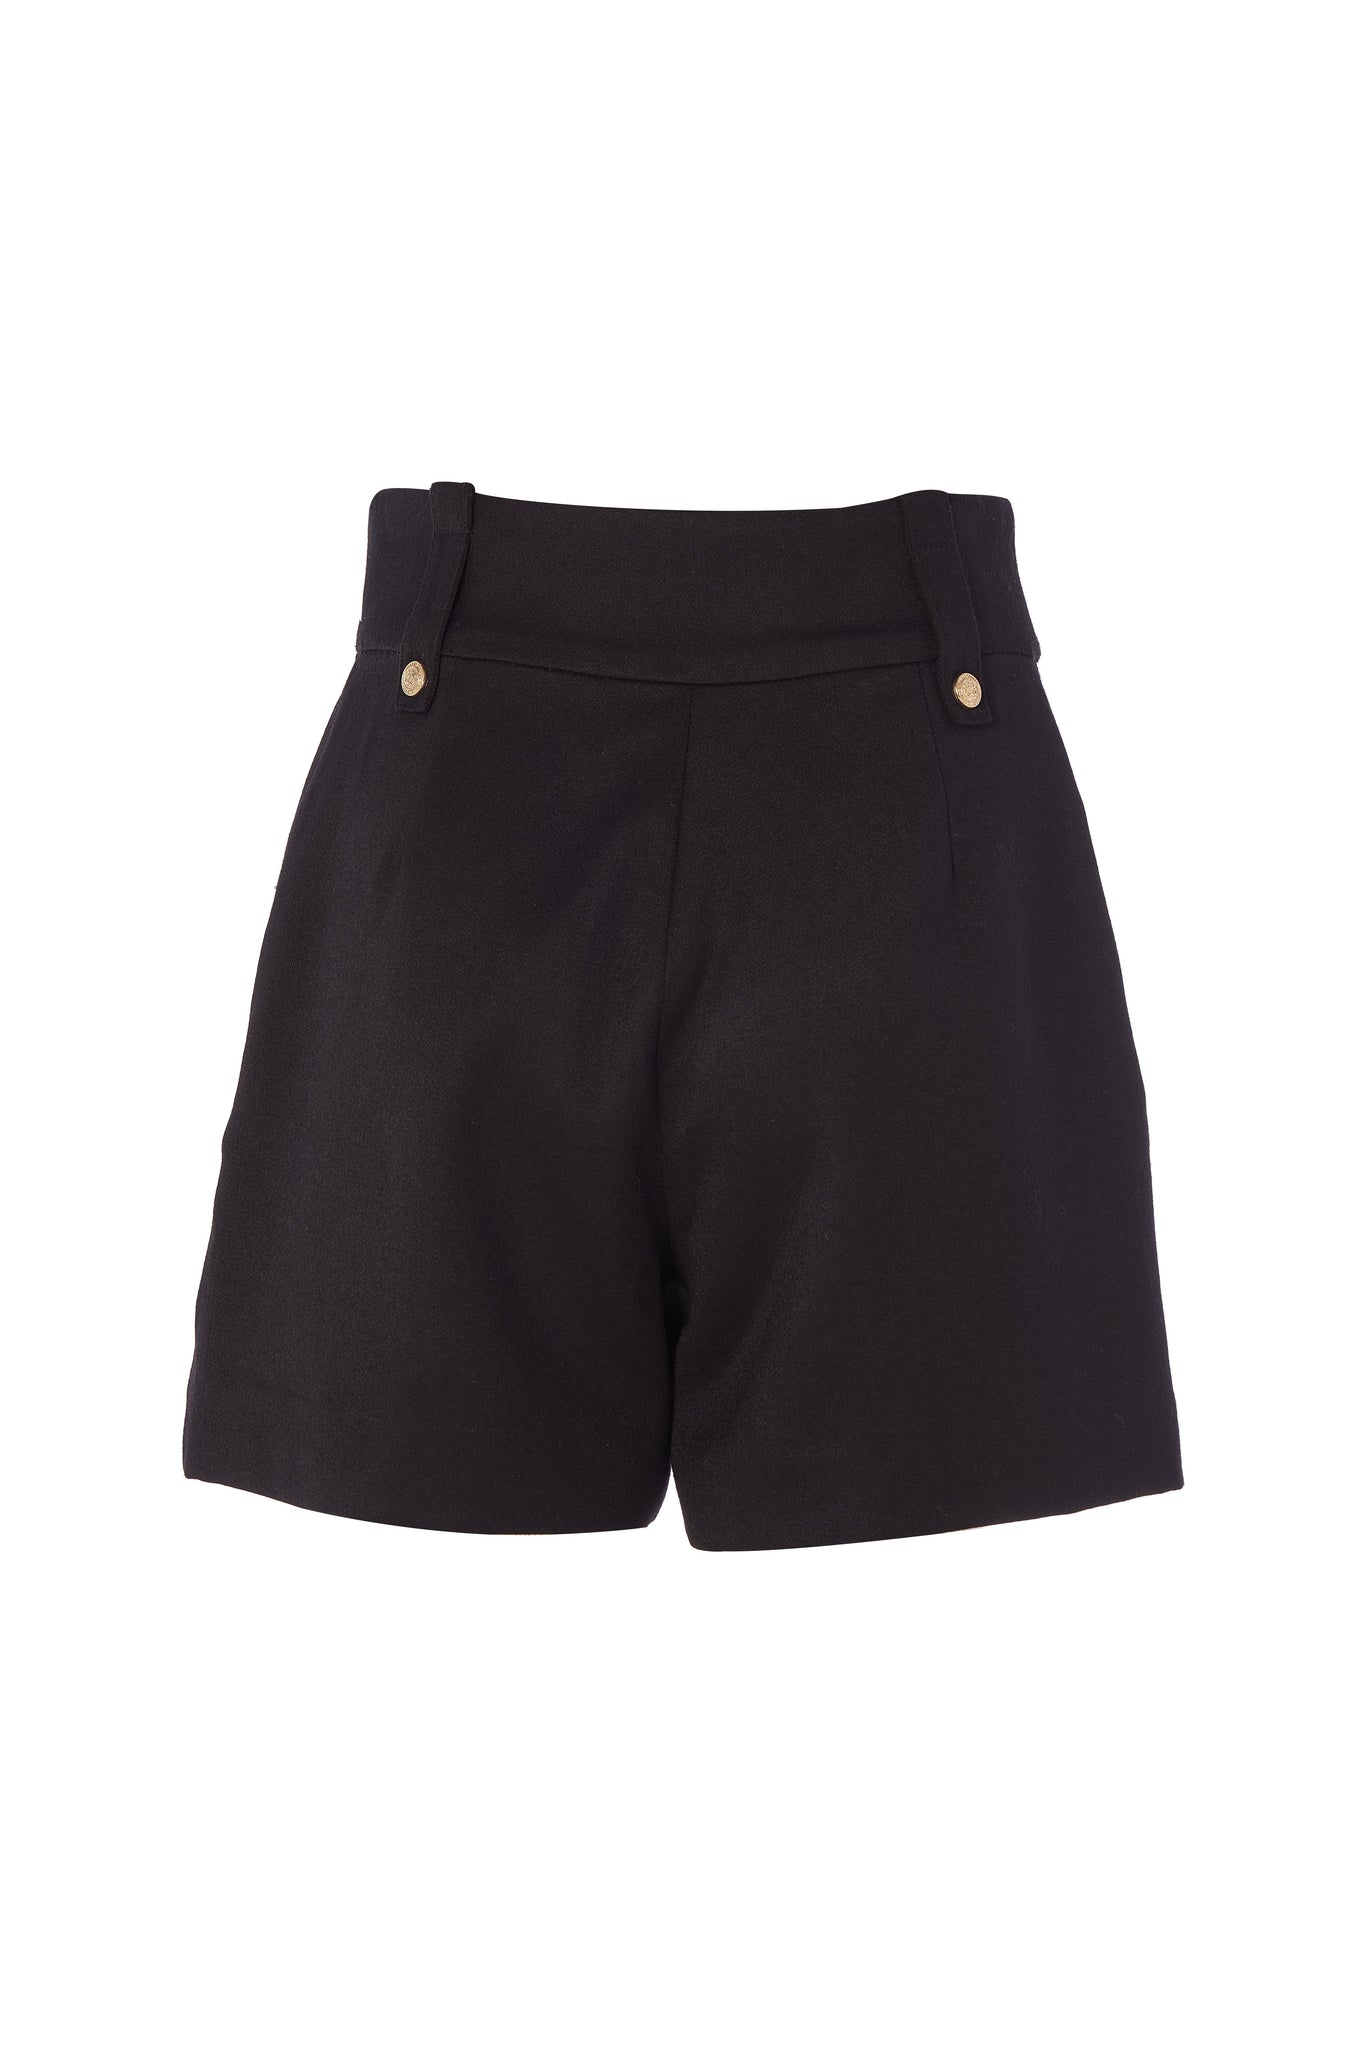 back of womens black high rise tailored shorts with two single knife pleats and centre front zip fly fastening with twin branded gold stud buttons and side hip pockets with branded rivet detailing at top and bottom of pockets